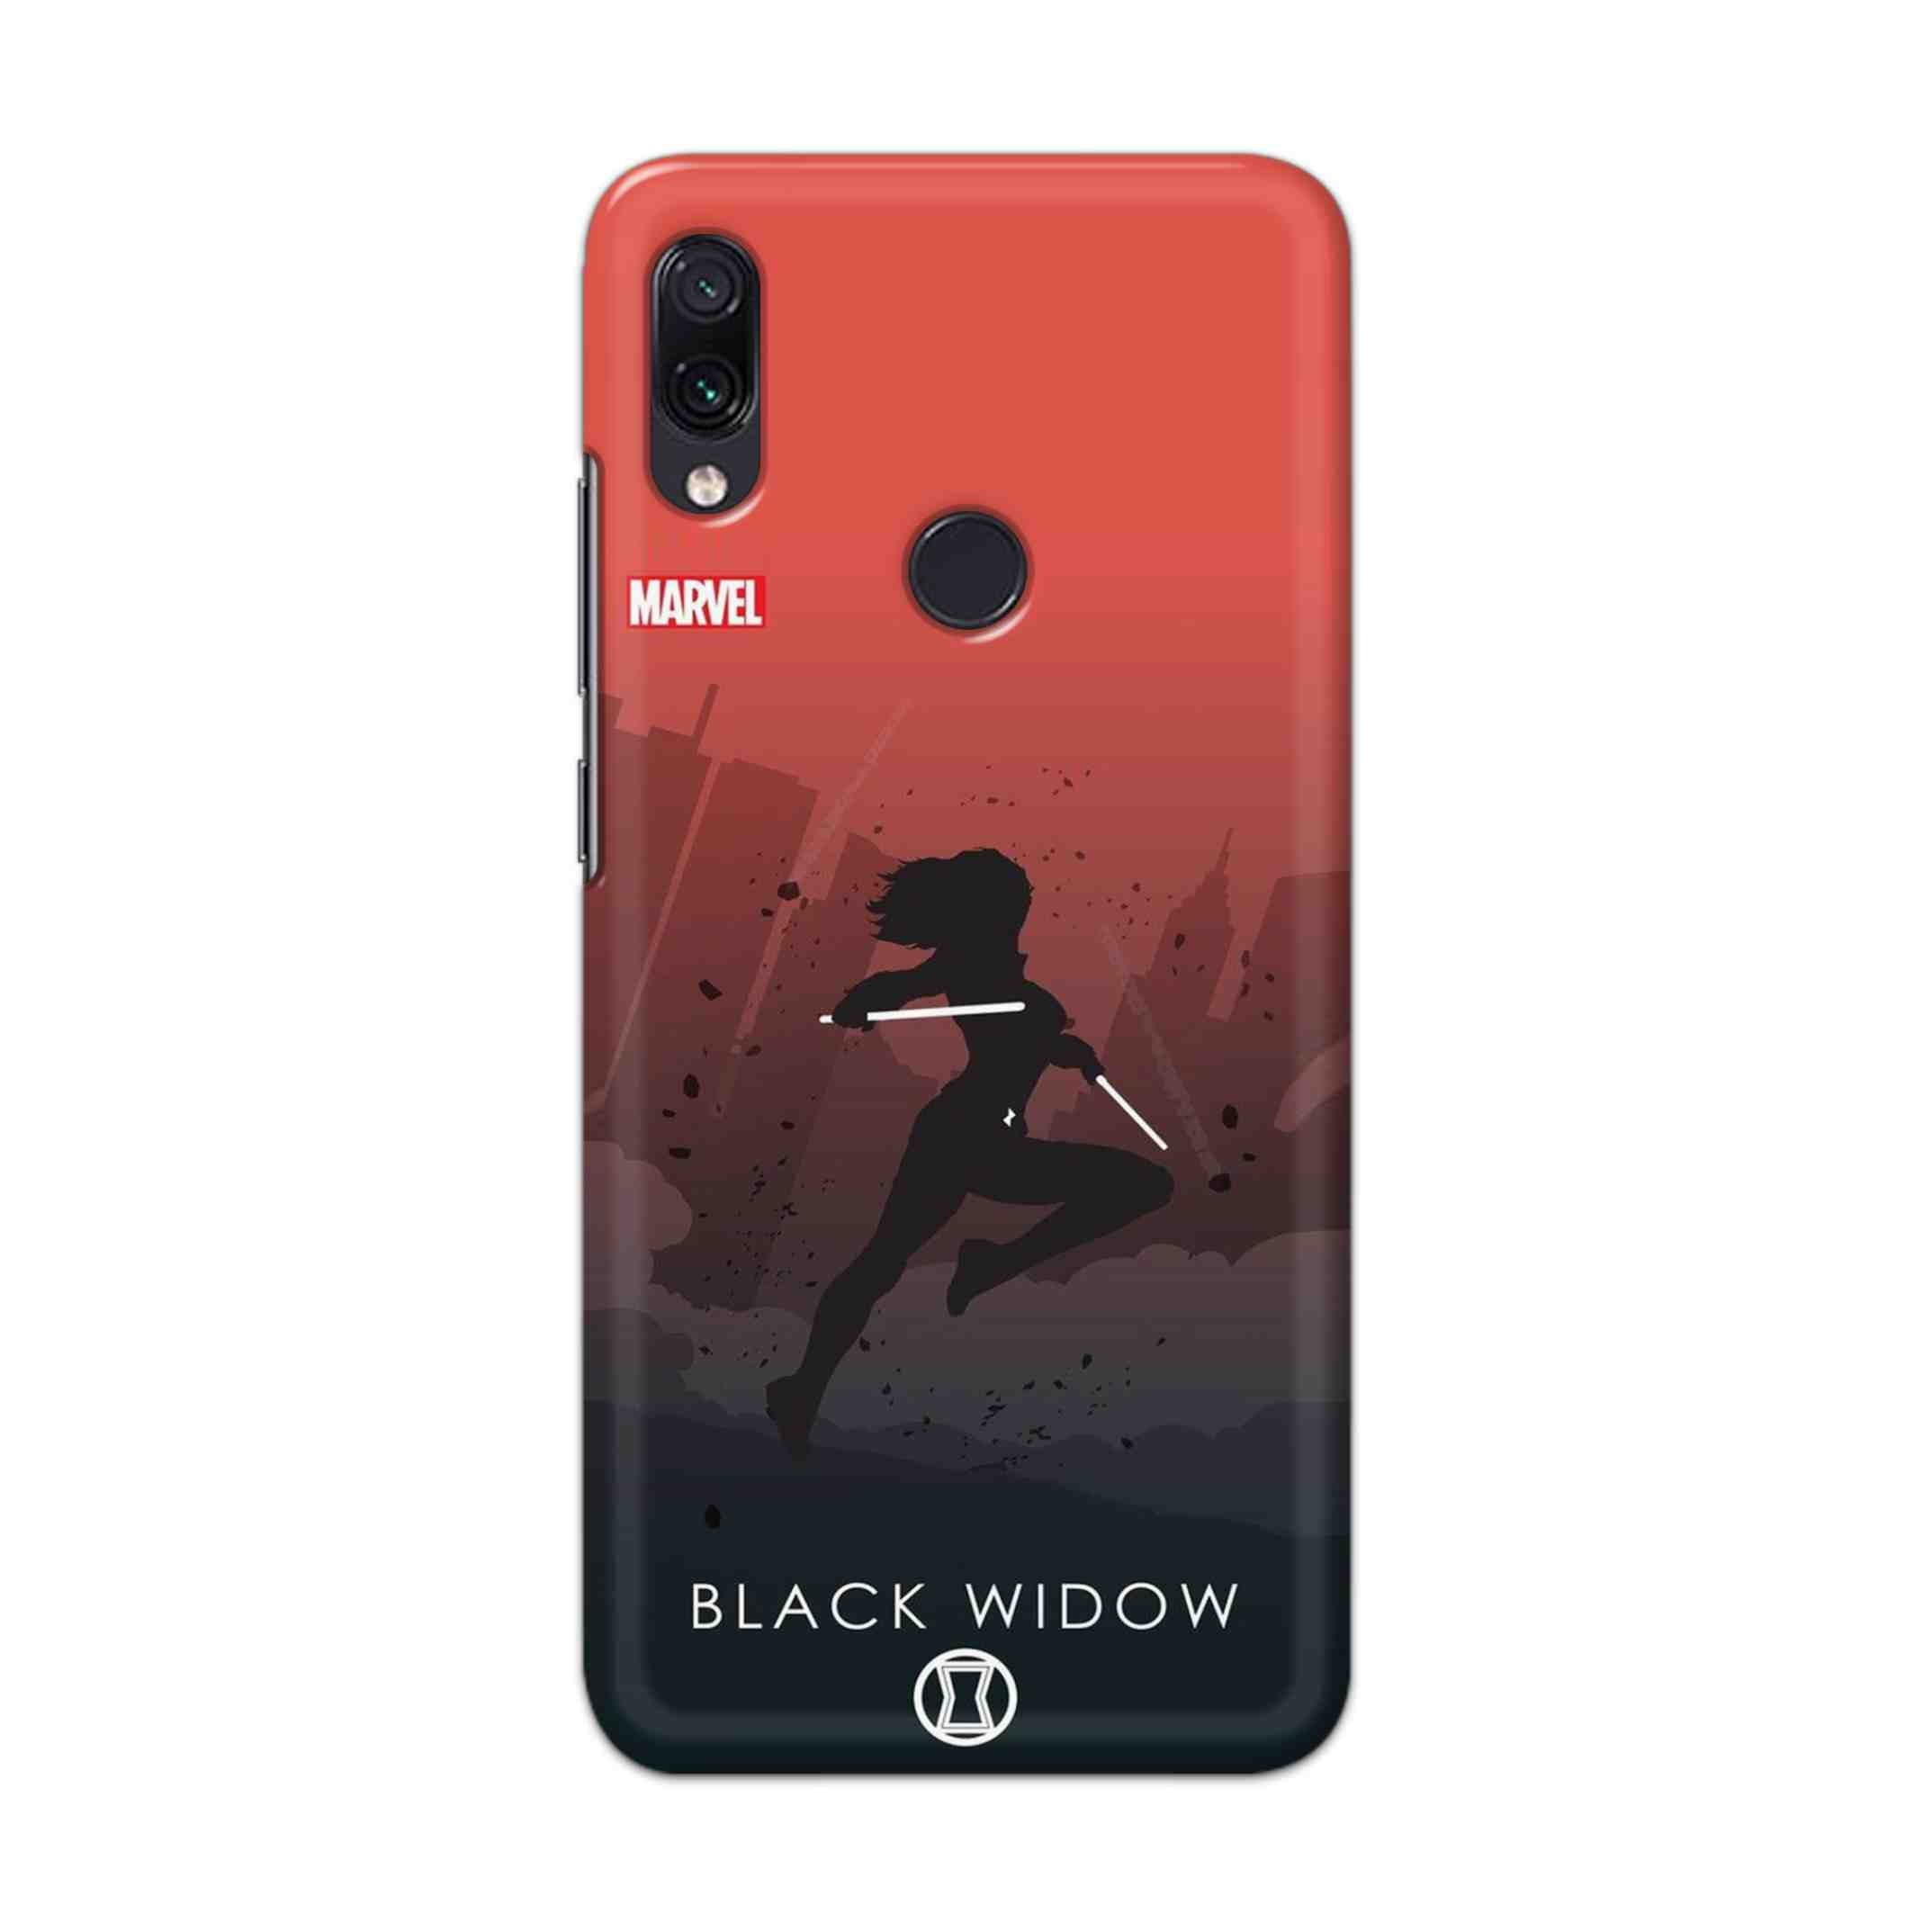 Buy Black Widow Hard Back Mobile Phone Case Cover For Redmi Note 7 / Note 7 Pro Online